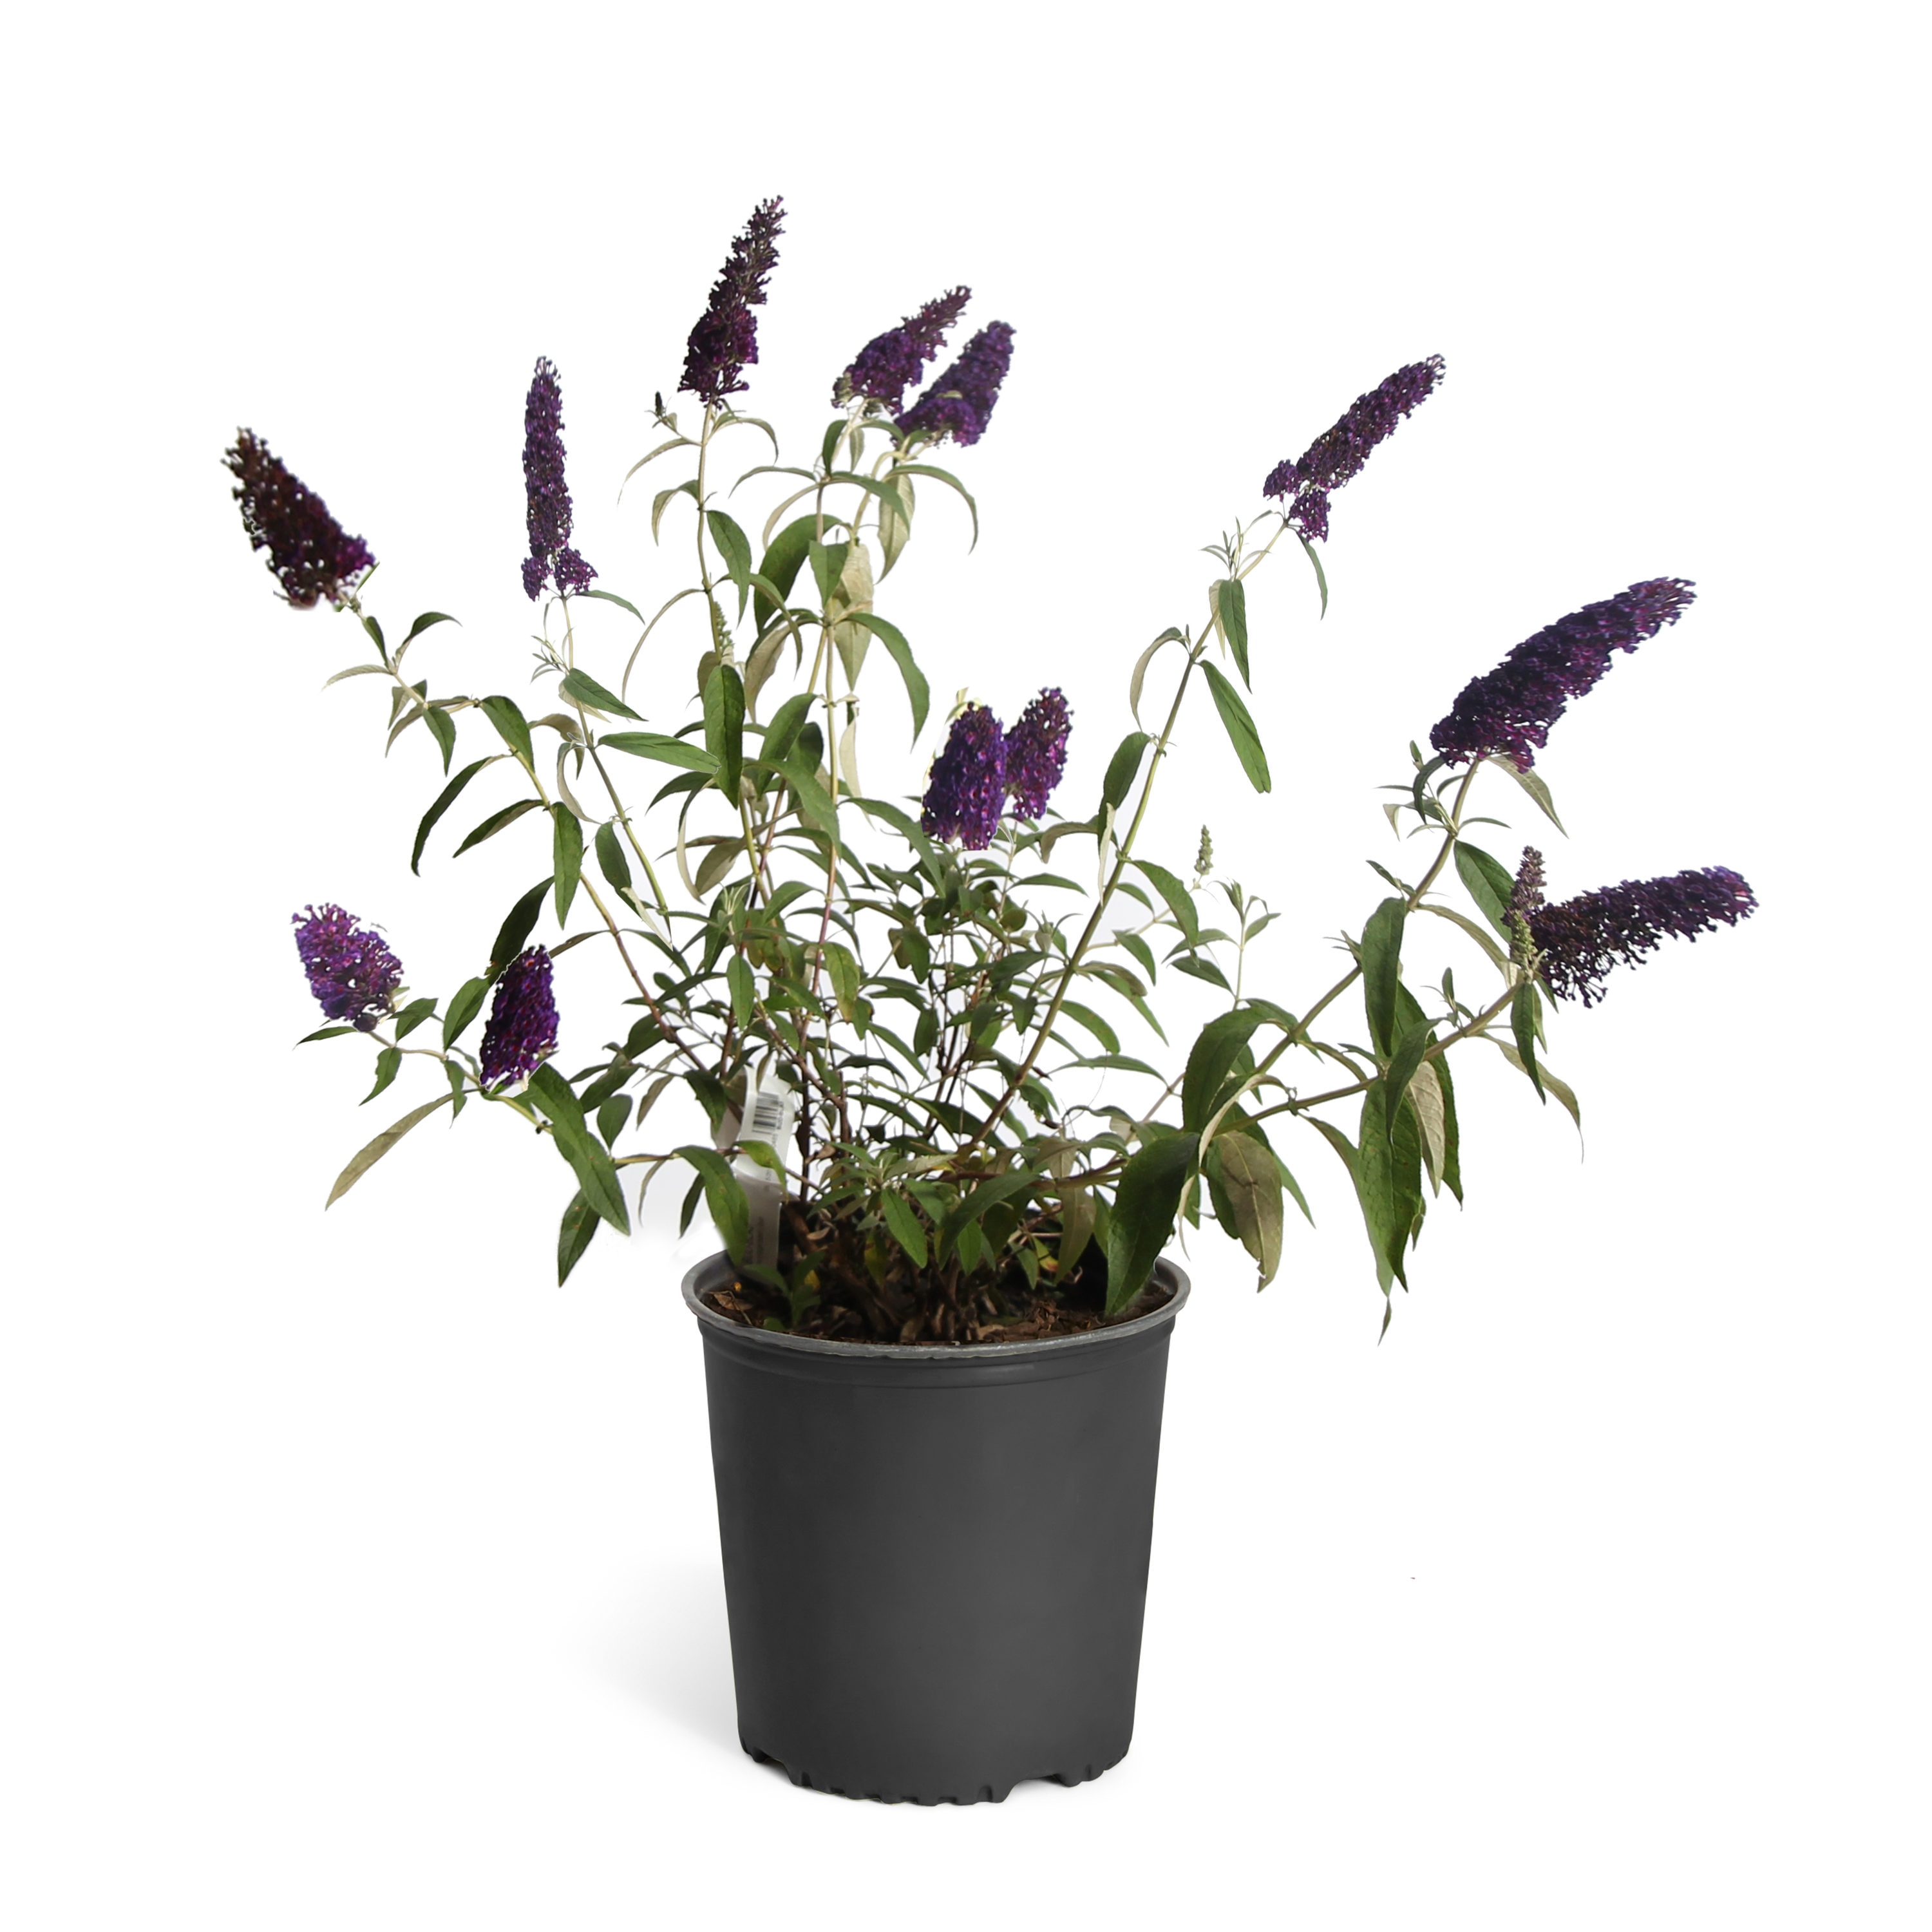 Image of Buddleia Black Knight in pot